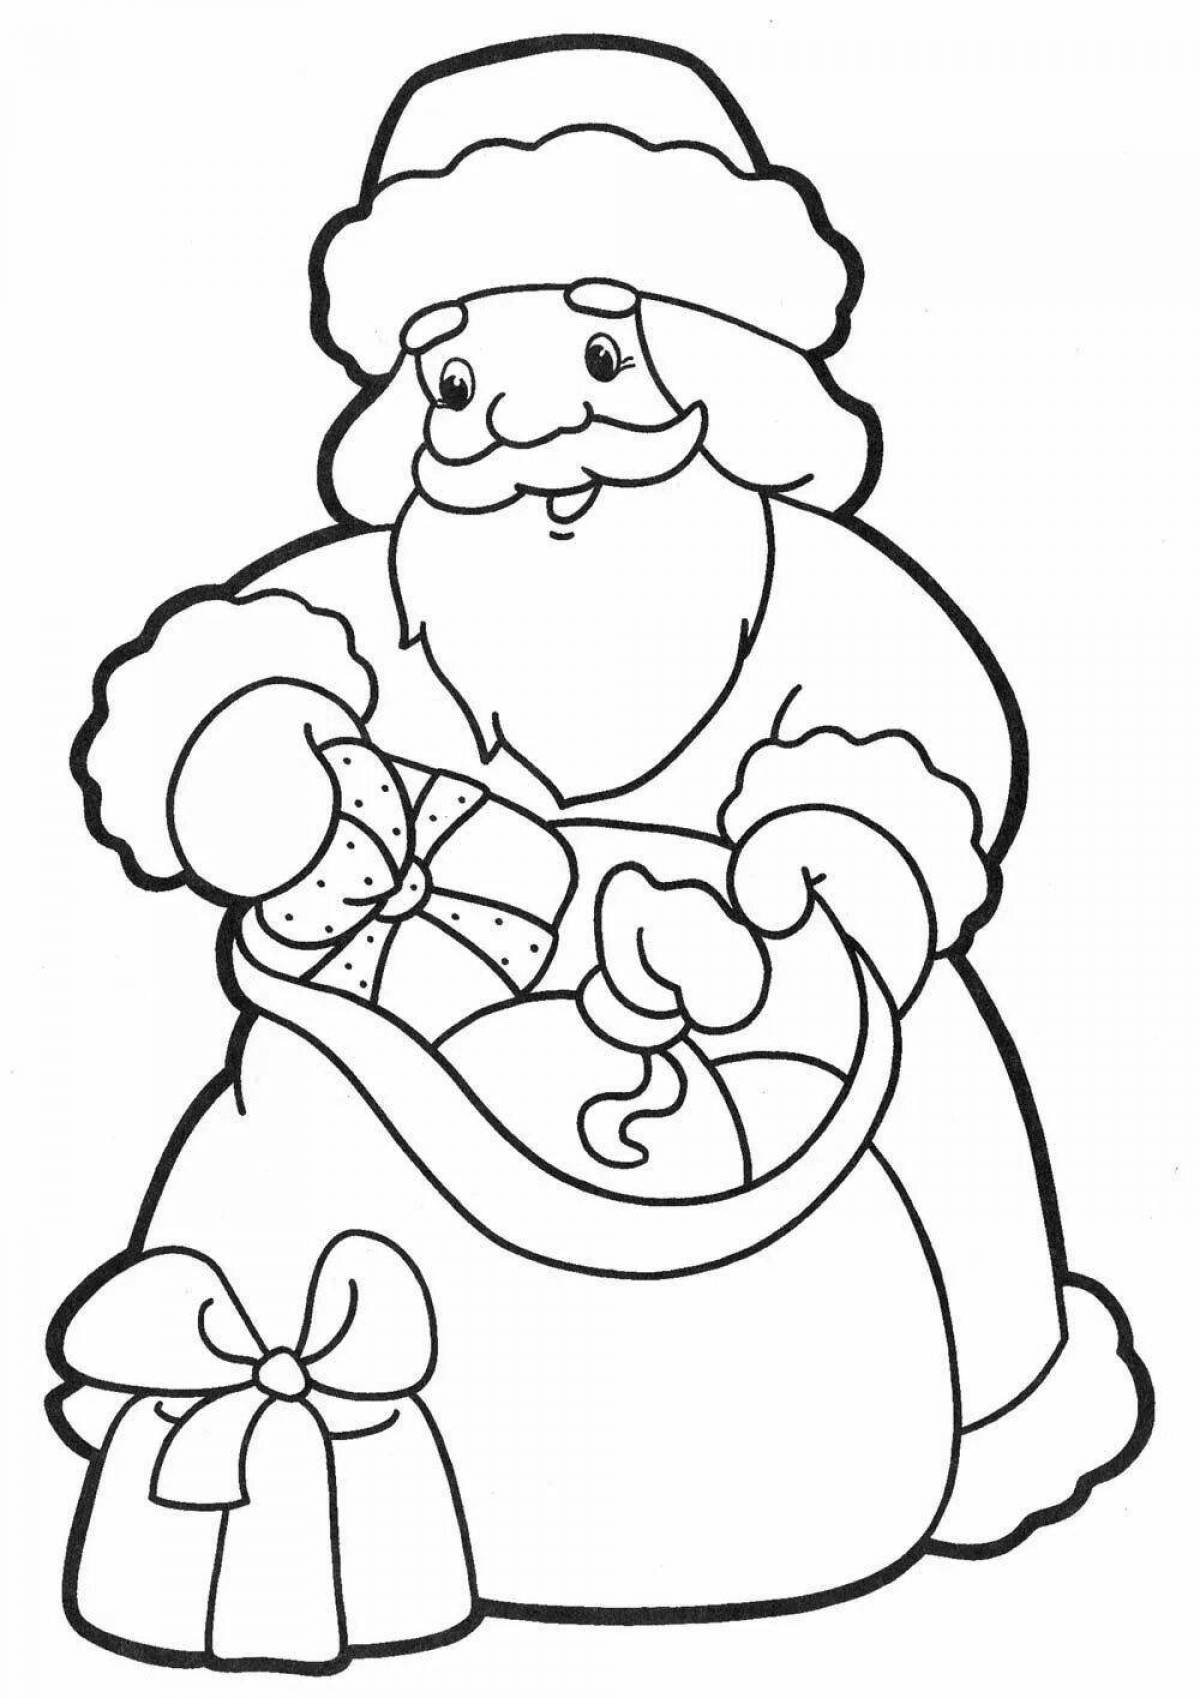 An entertaining coloring book Santa Claus for children 2-3 years old